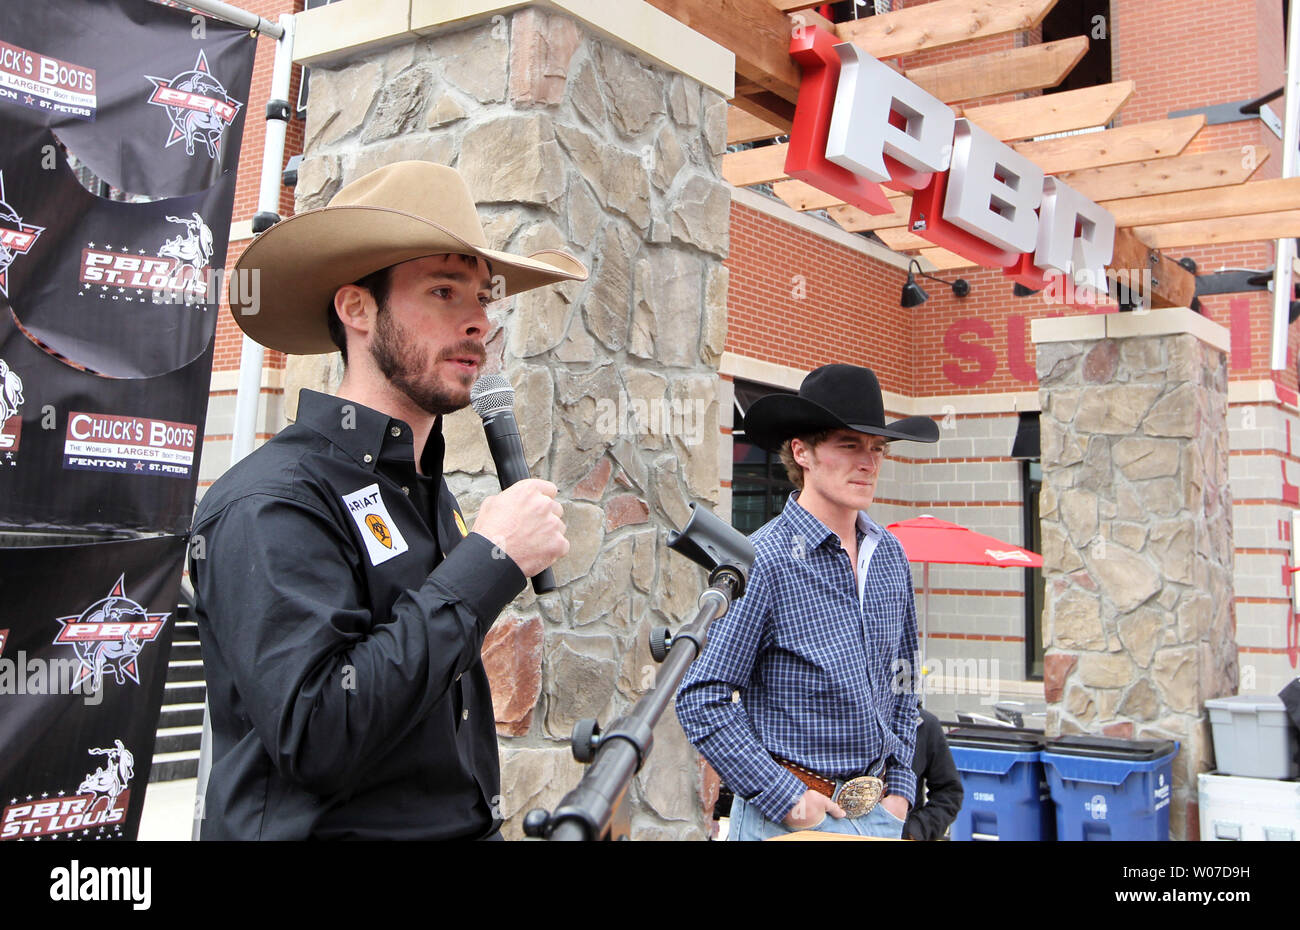 Professional bullrider Luke Snyder talks to the crowd while fellow rider Reese Cates listens in during grand opening festivities at the PBR Bar in Ballpark Village in St. Louis on April 4, 2014. The PBR Bar is the seventh one to open in the country.  UPI/Bill Greenblatt Stock Photo